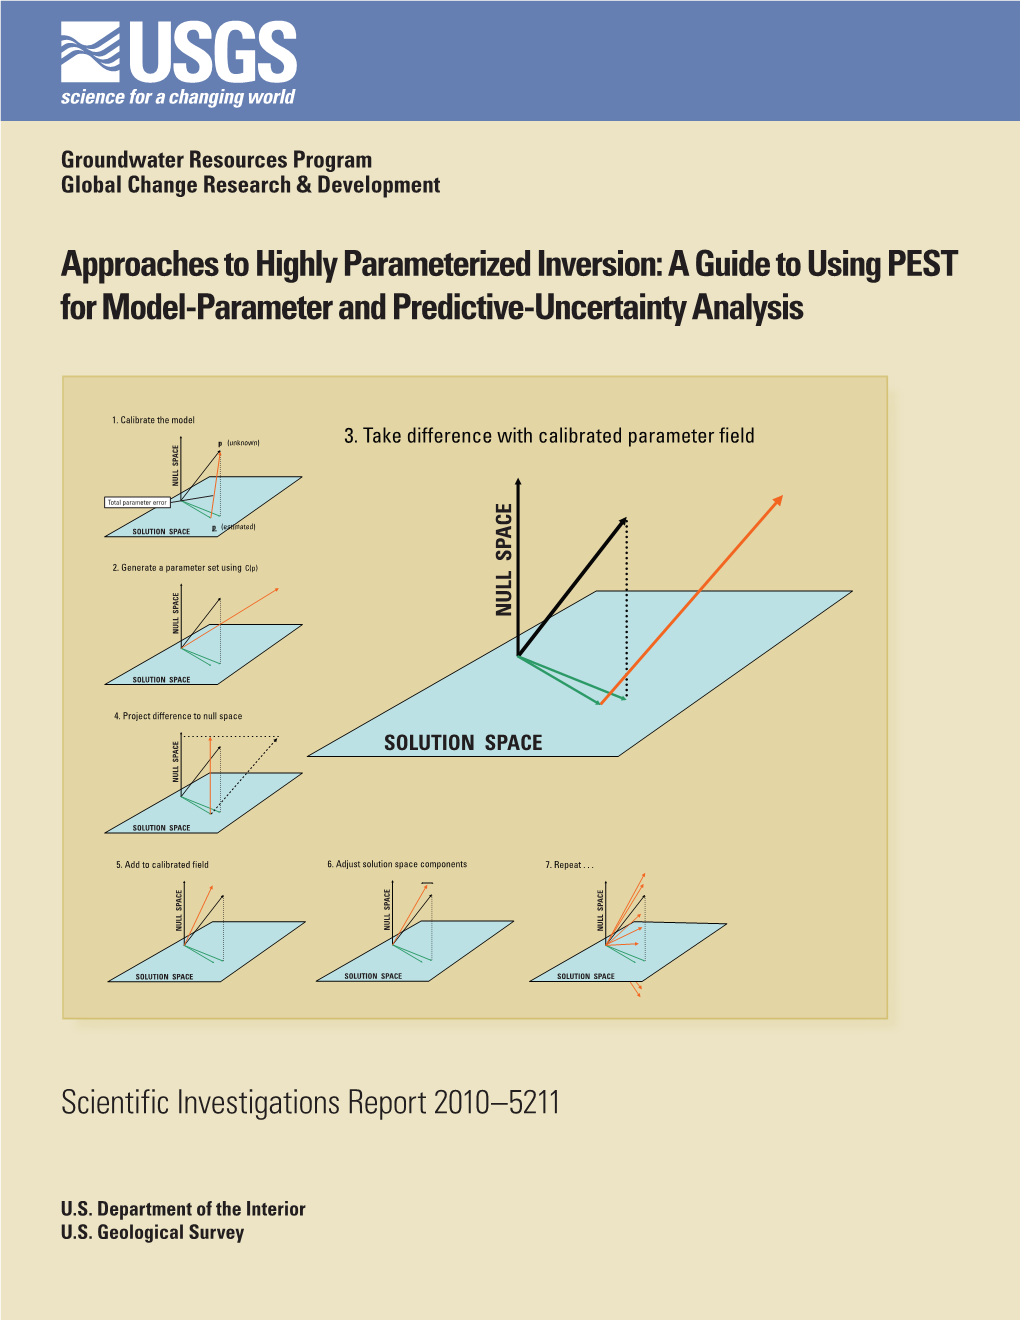 A Guide to Using PEST for Model-Parameter and Predictive-Uncertainty Analysis